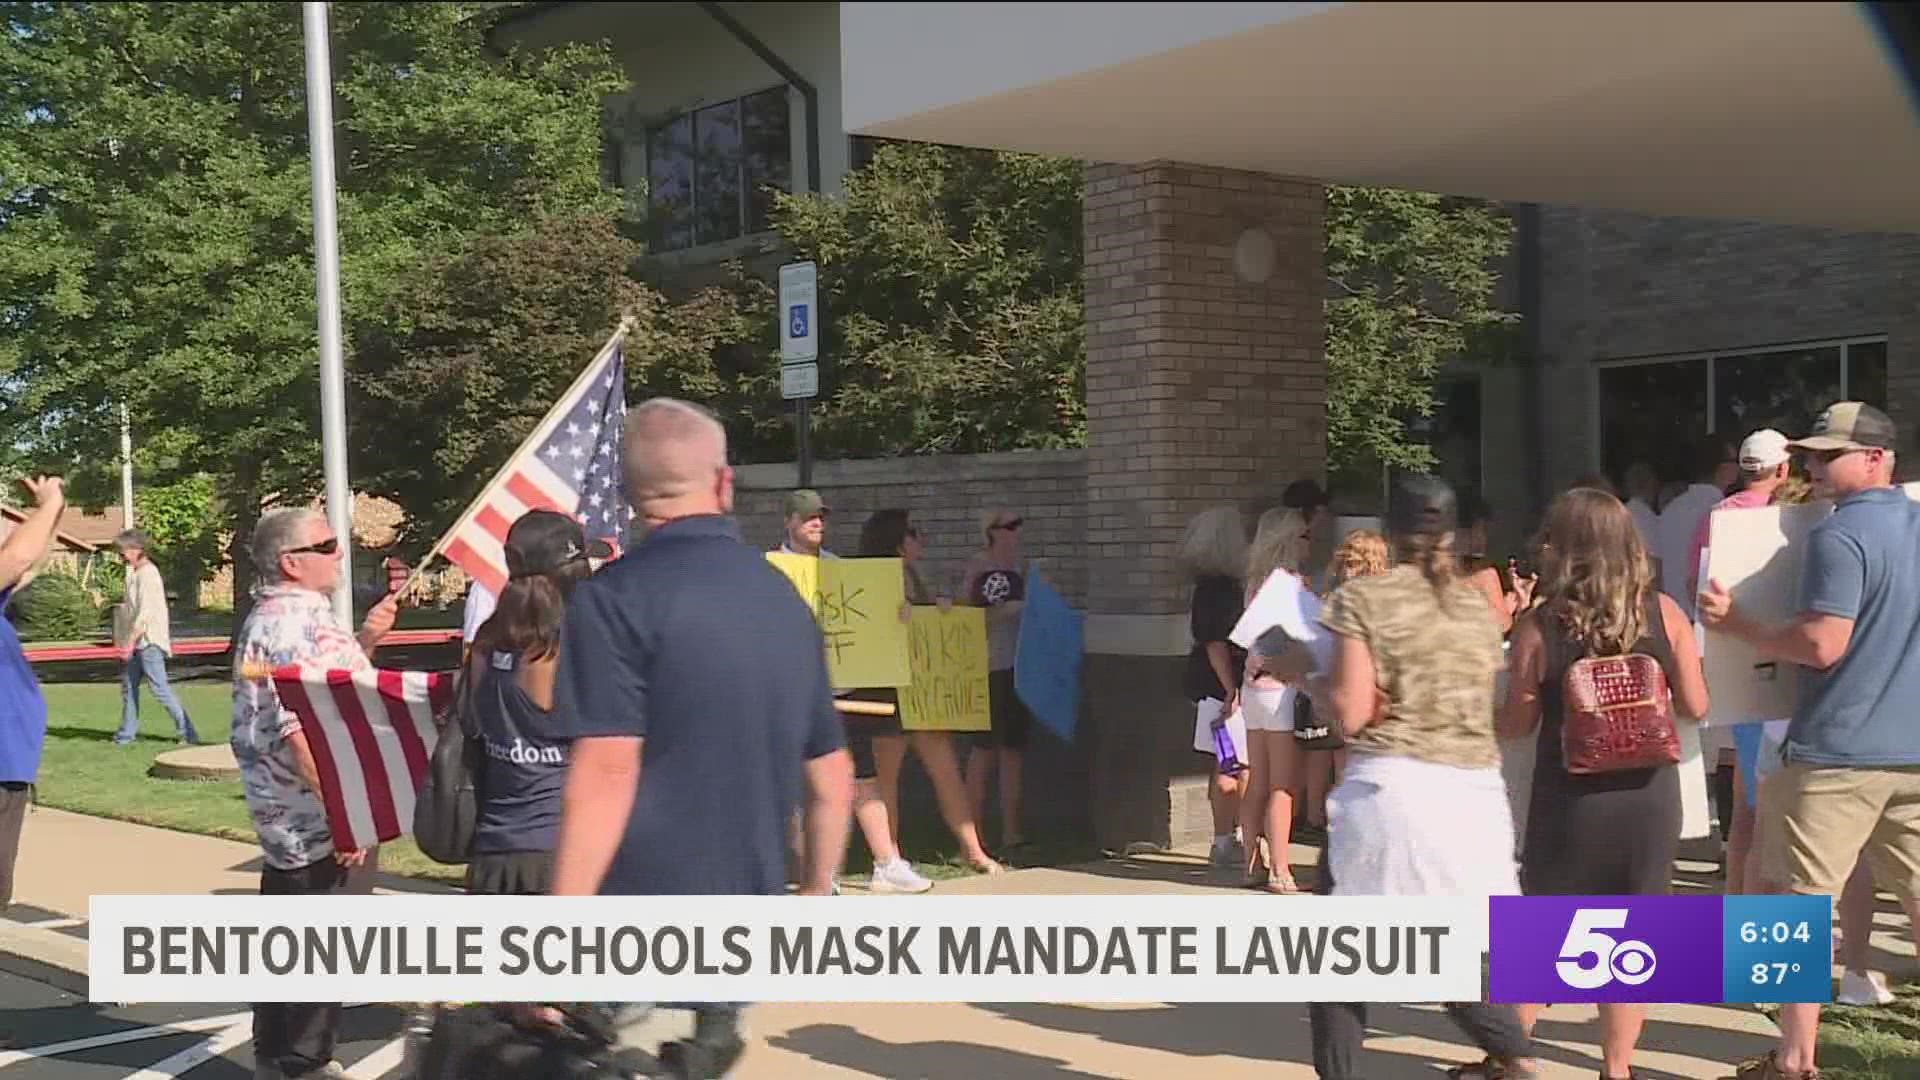 Three parents are suing over the school district’s decision on Aug. 11 to require face masks after a judge blocked the state’s mask mandate ban.